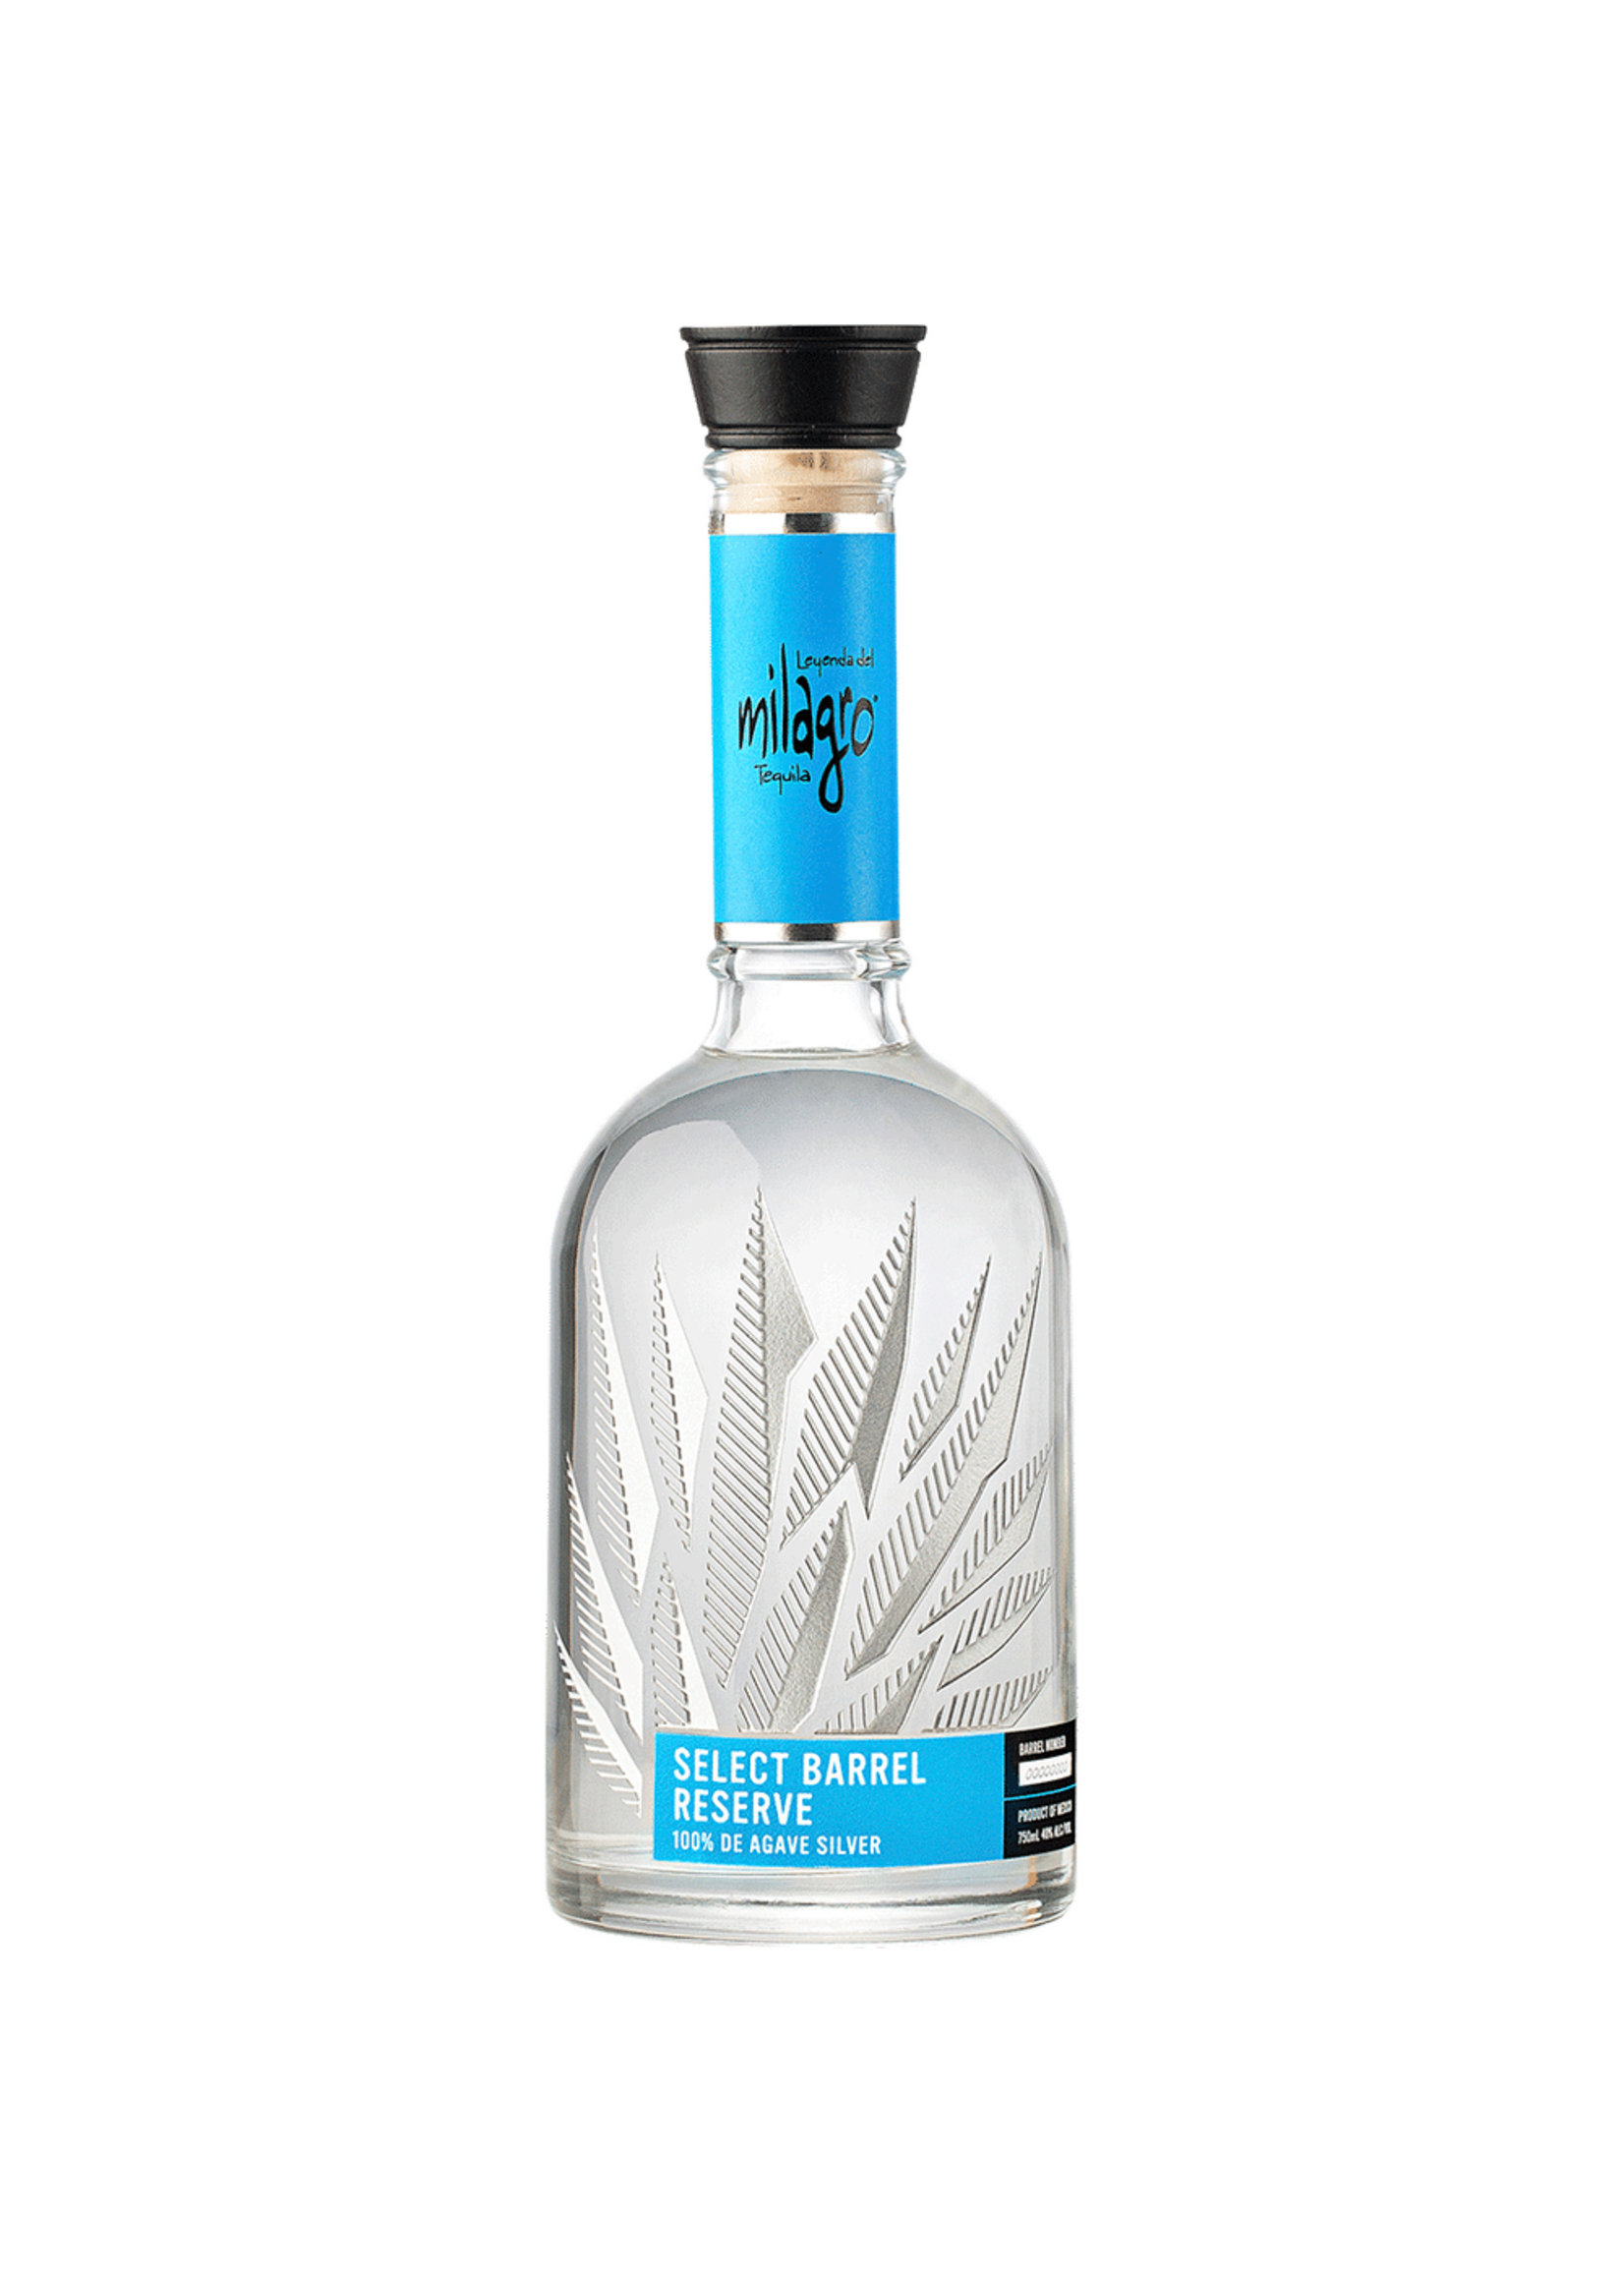 Milagro Silver Select Barrel Reserve 80Proof 750ml